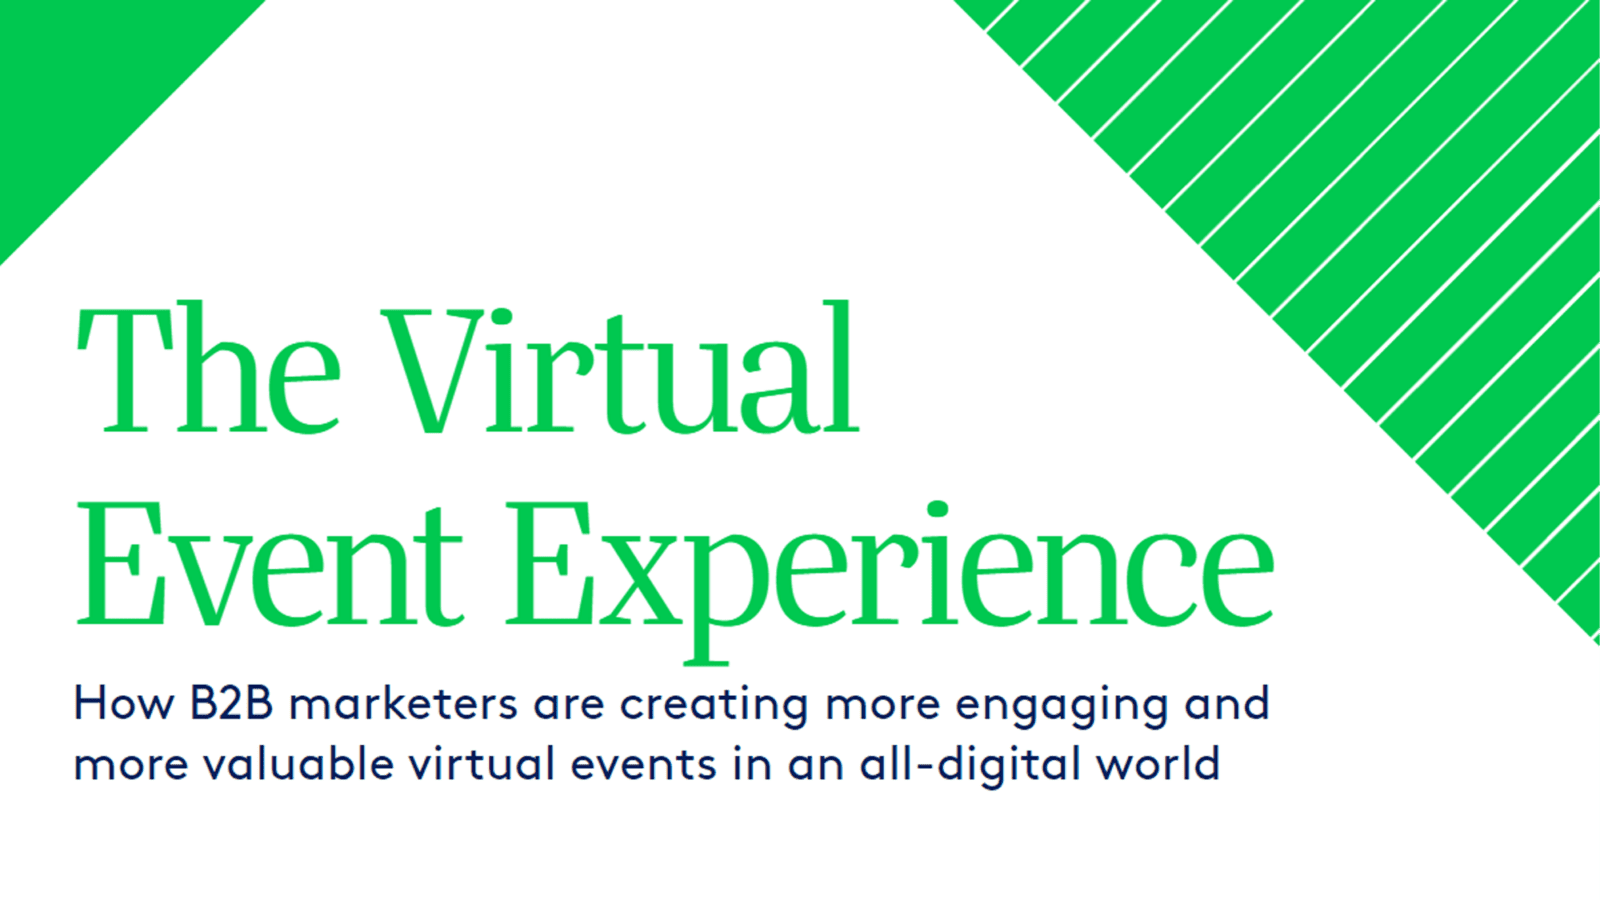 How to Master the Virtual Event Experience